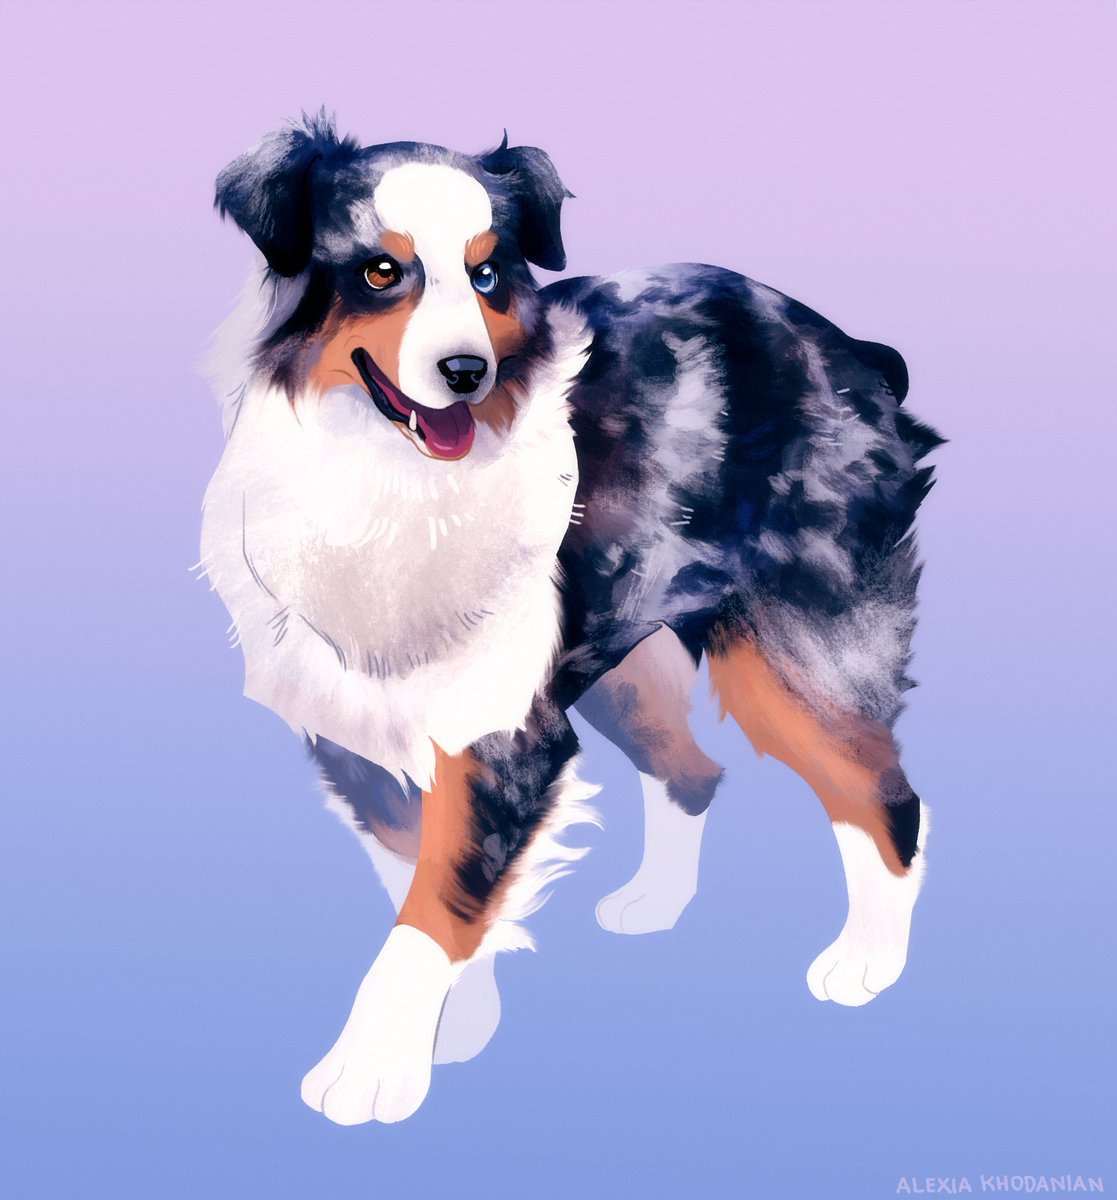  #doggust day 23: Australian Shepherd! My neighbor had one growing up named Speckles. Such fun little friends